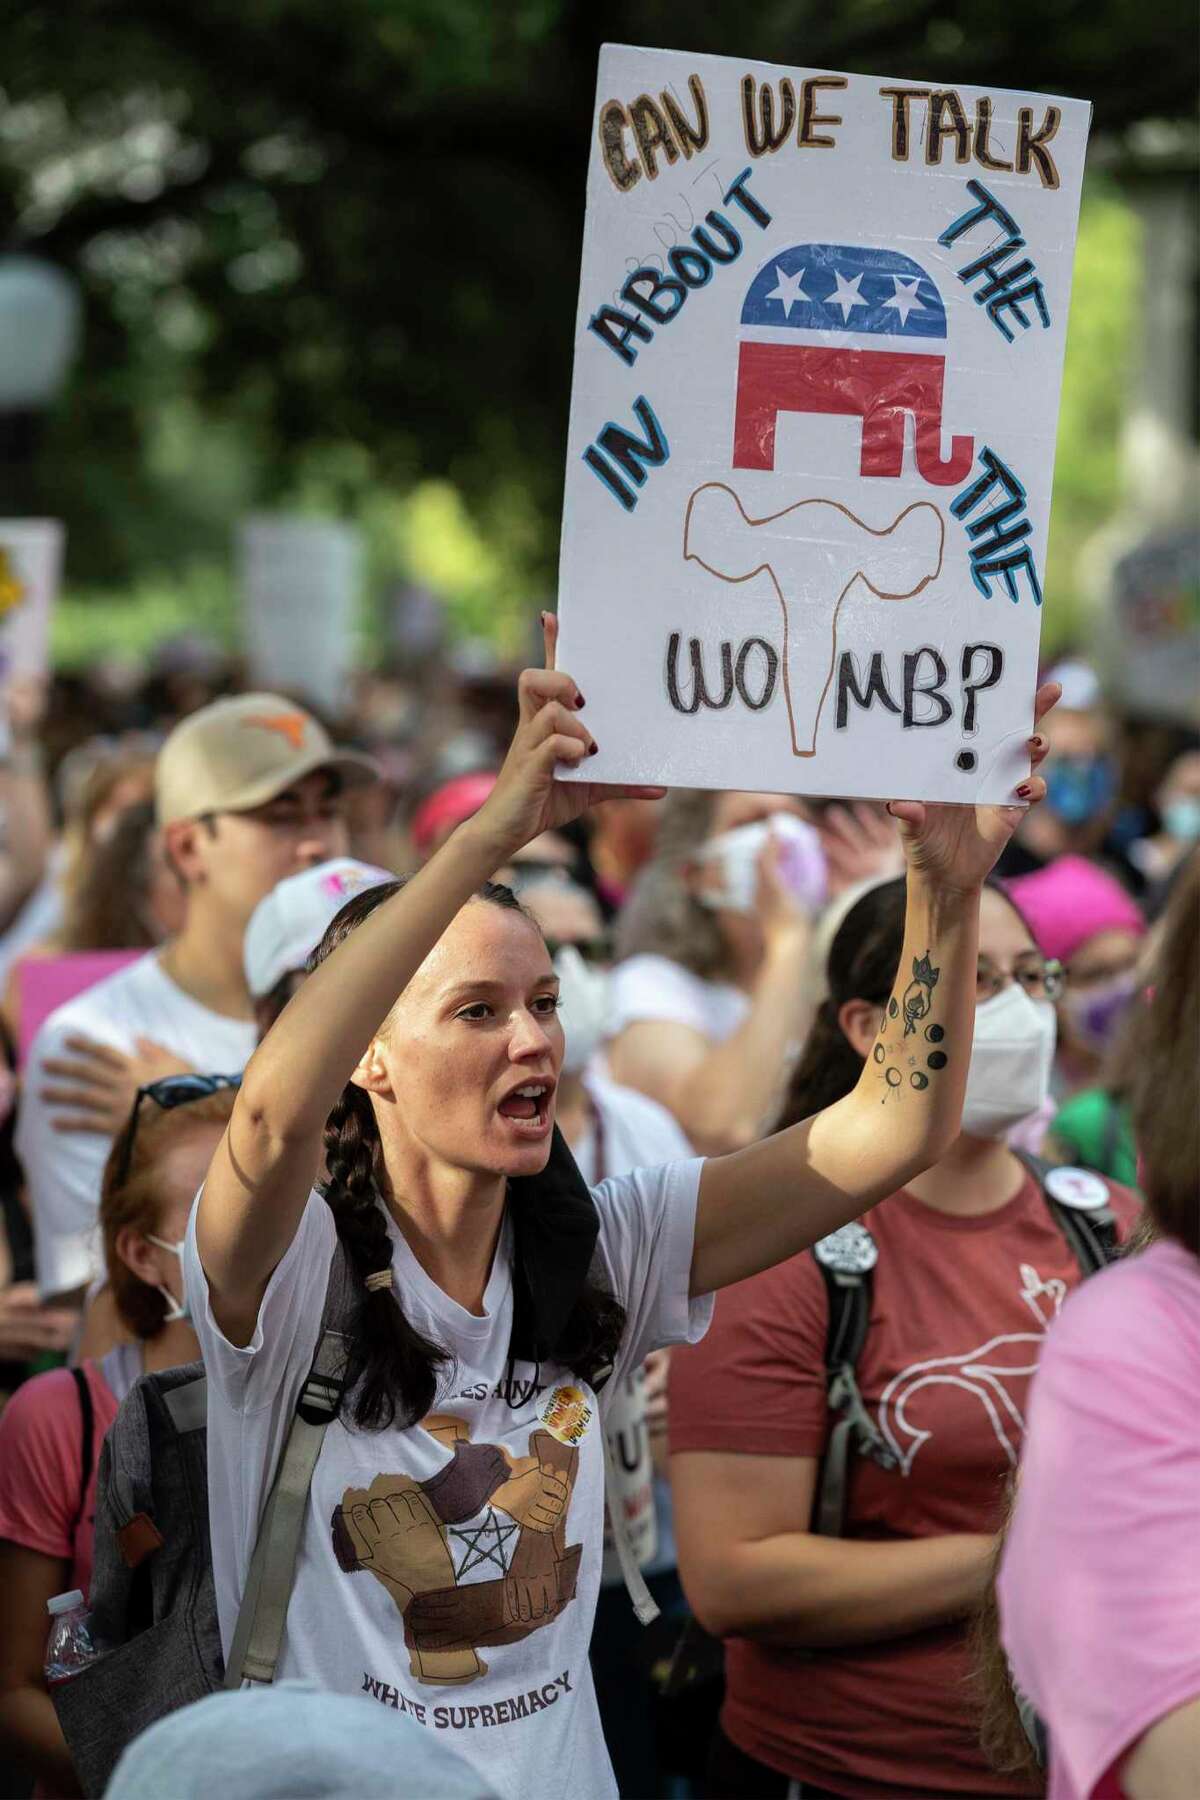 These women in Texas and those elsewhere Saturday were marching for the rights of all American women.